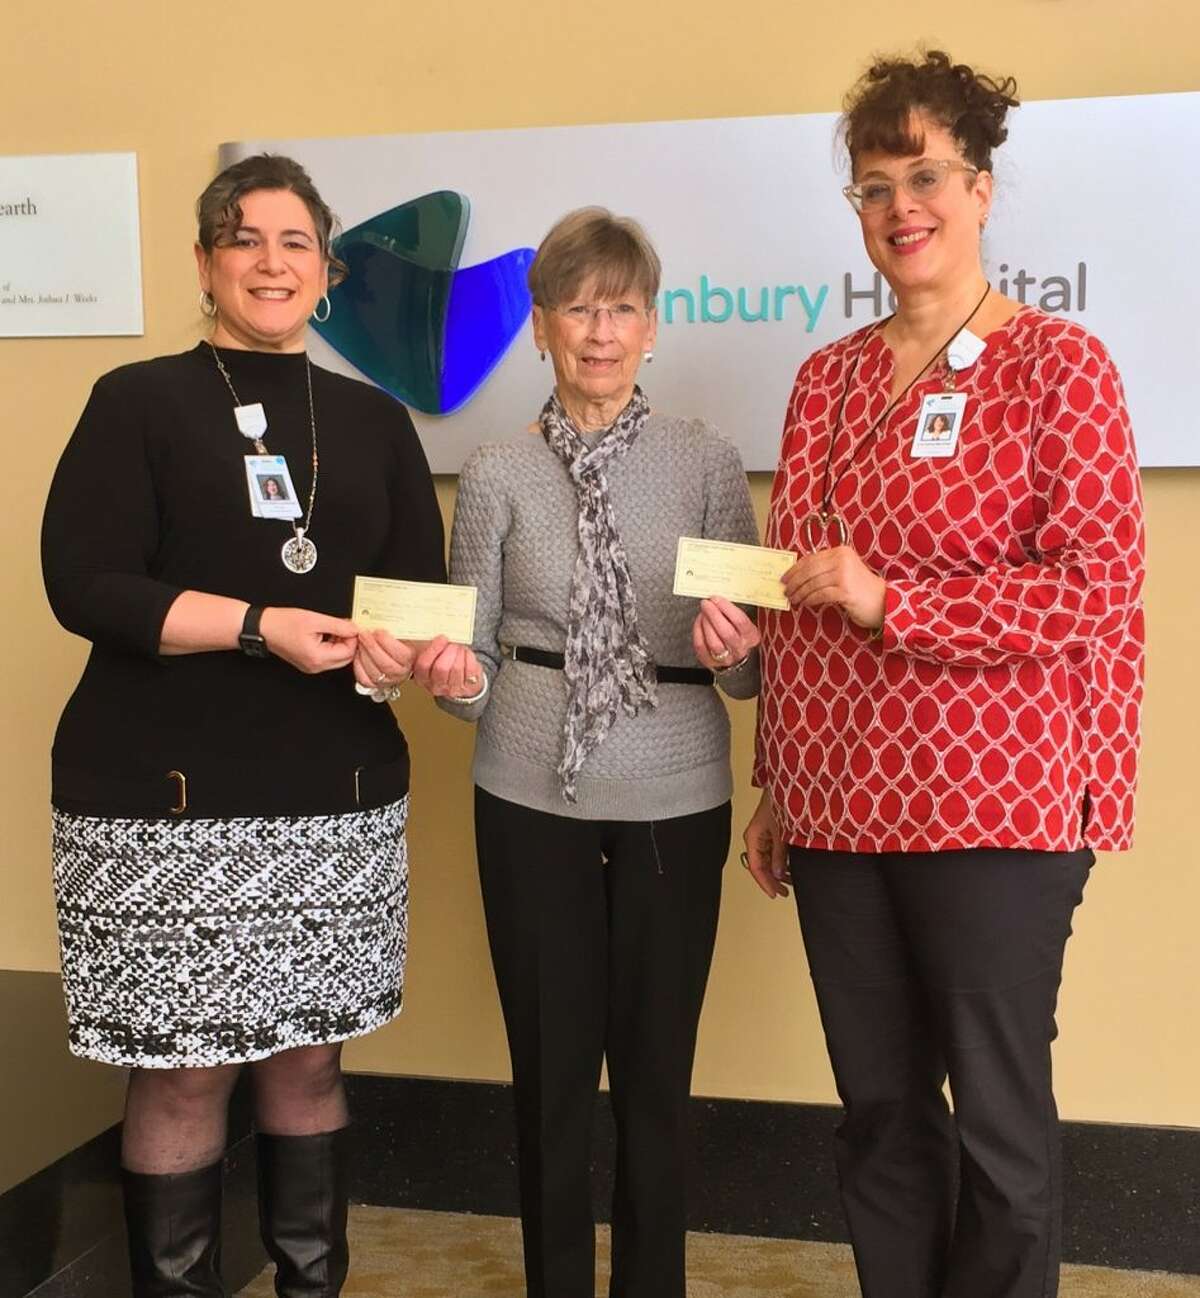 Pictured left to right are Amy Lionheart, manager of volunteer services at Danbury Hospital , Gen Fagan, finance committee member of The Ridgefield Thrift Shop, and Lorraine Sutner, grants manager for Western Connecticut Health Network.